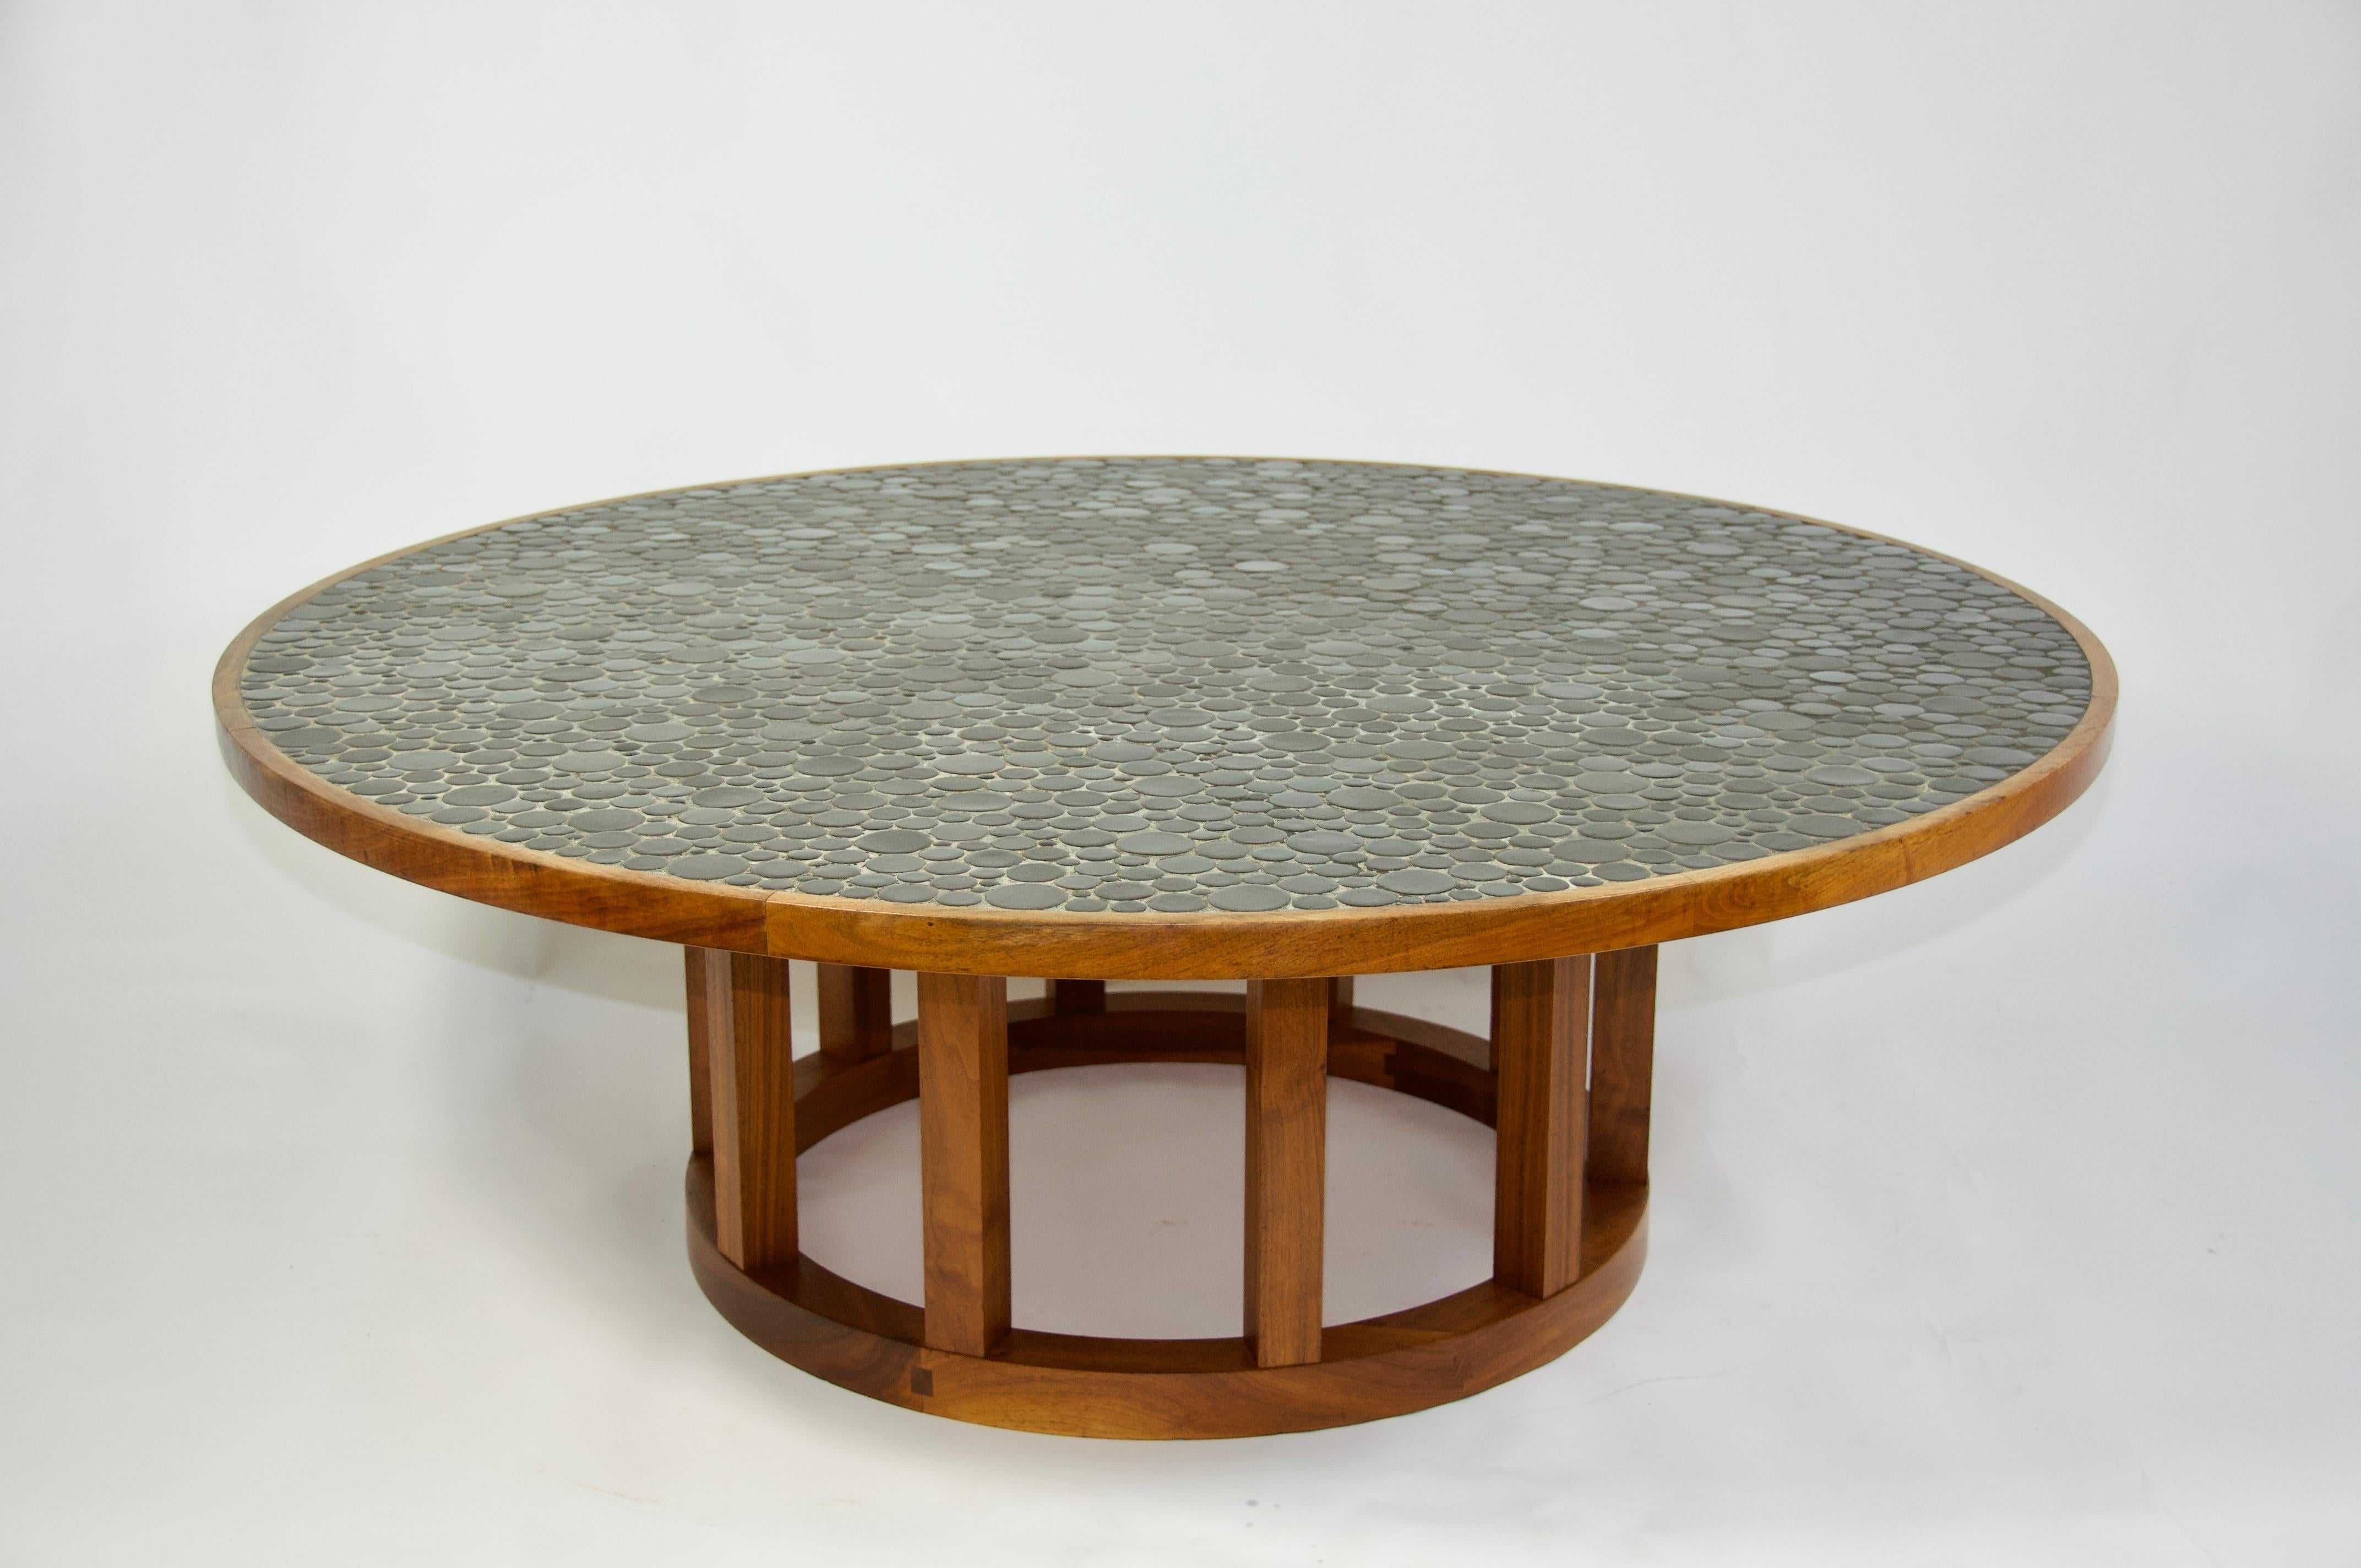 Offered by OLIVER MODERN, Ceramic tile-top coffee table by Gordon and Jane Martz for Marshall Studios. Walnut frame.